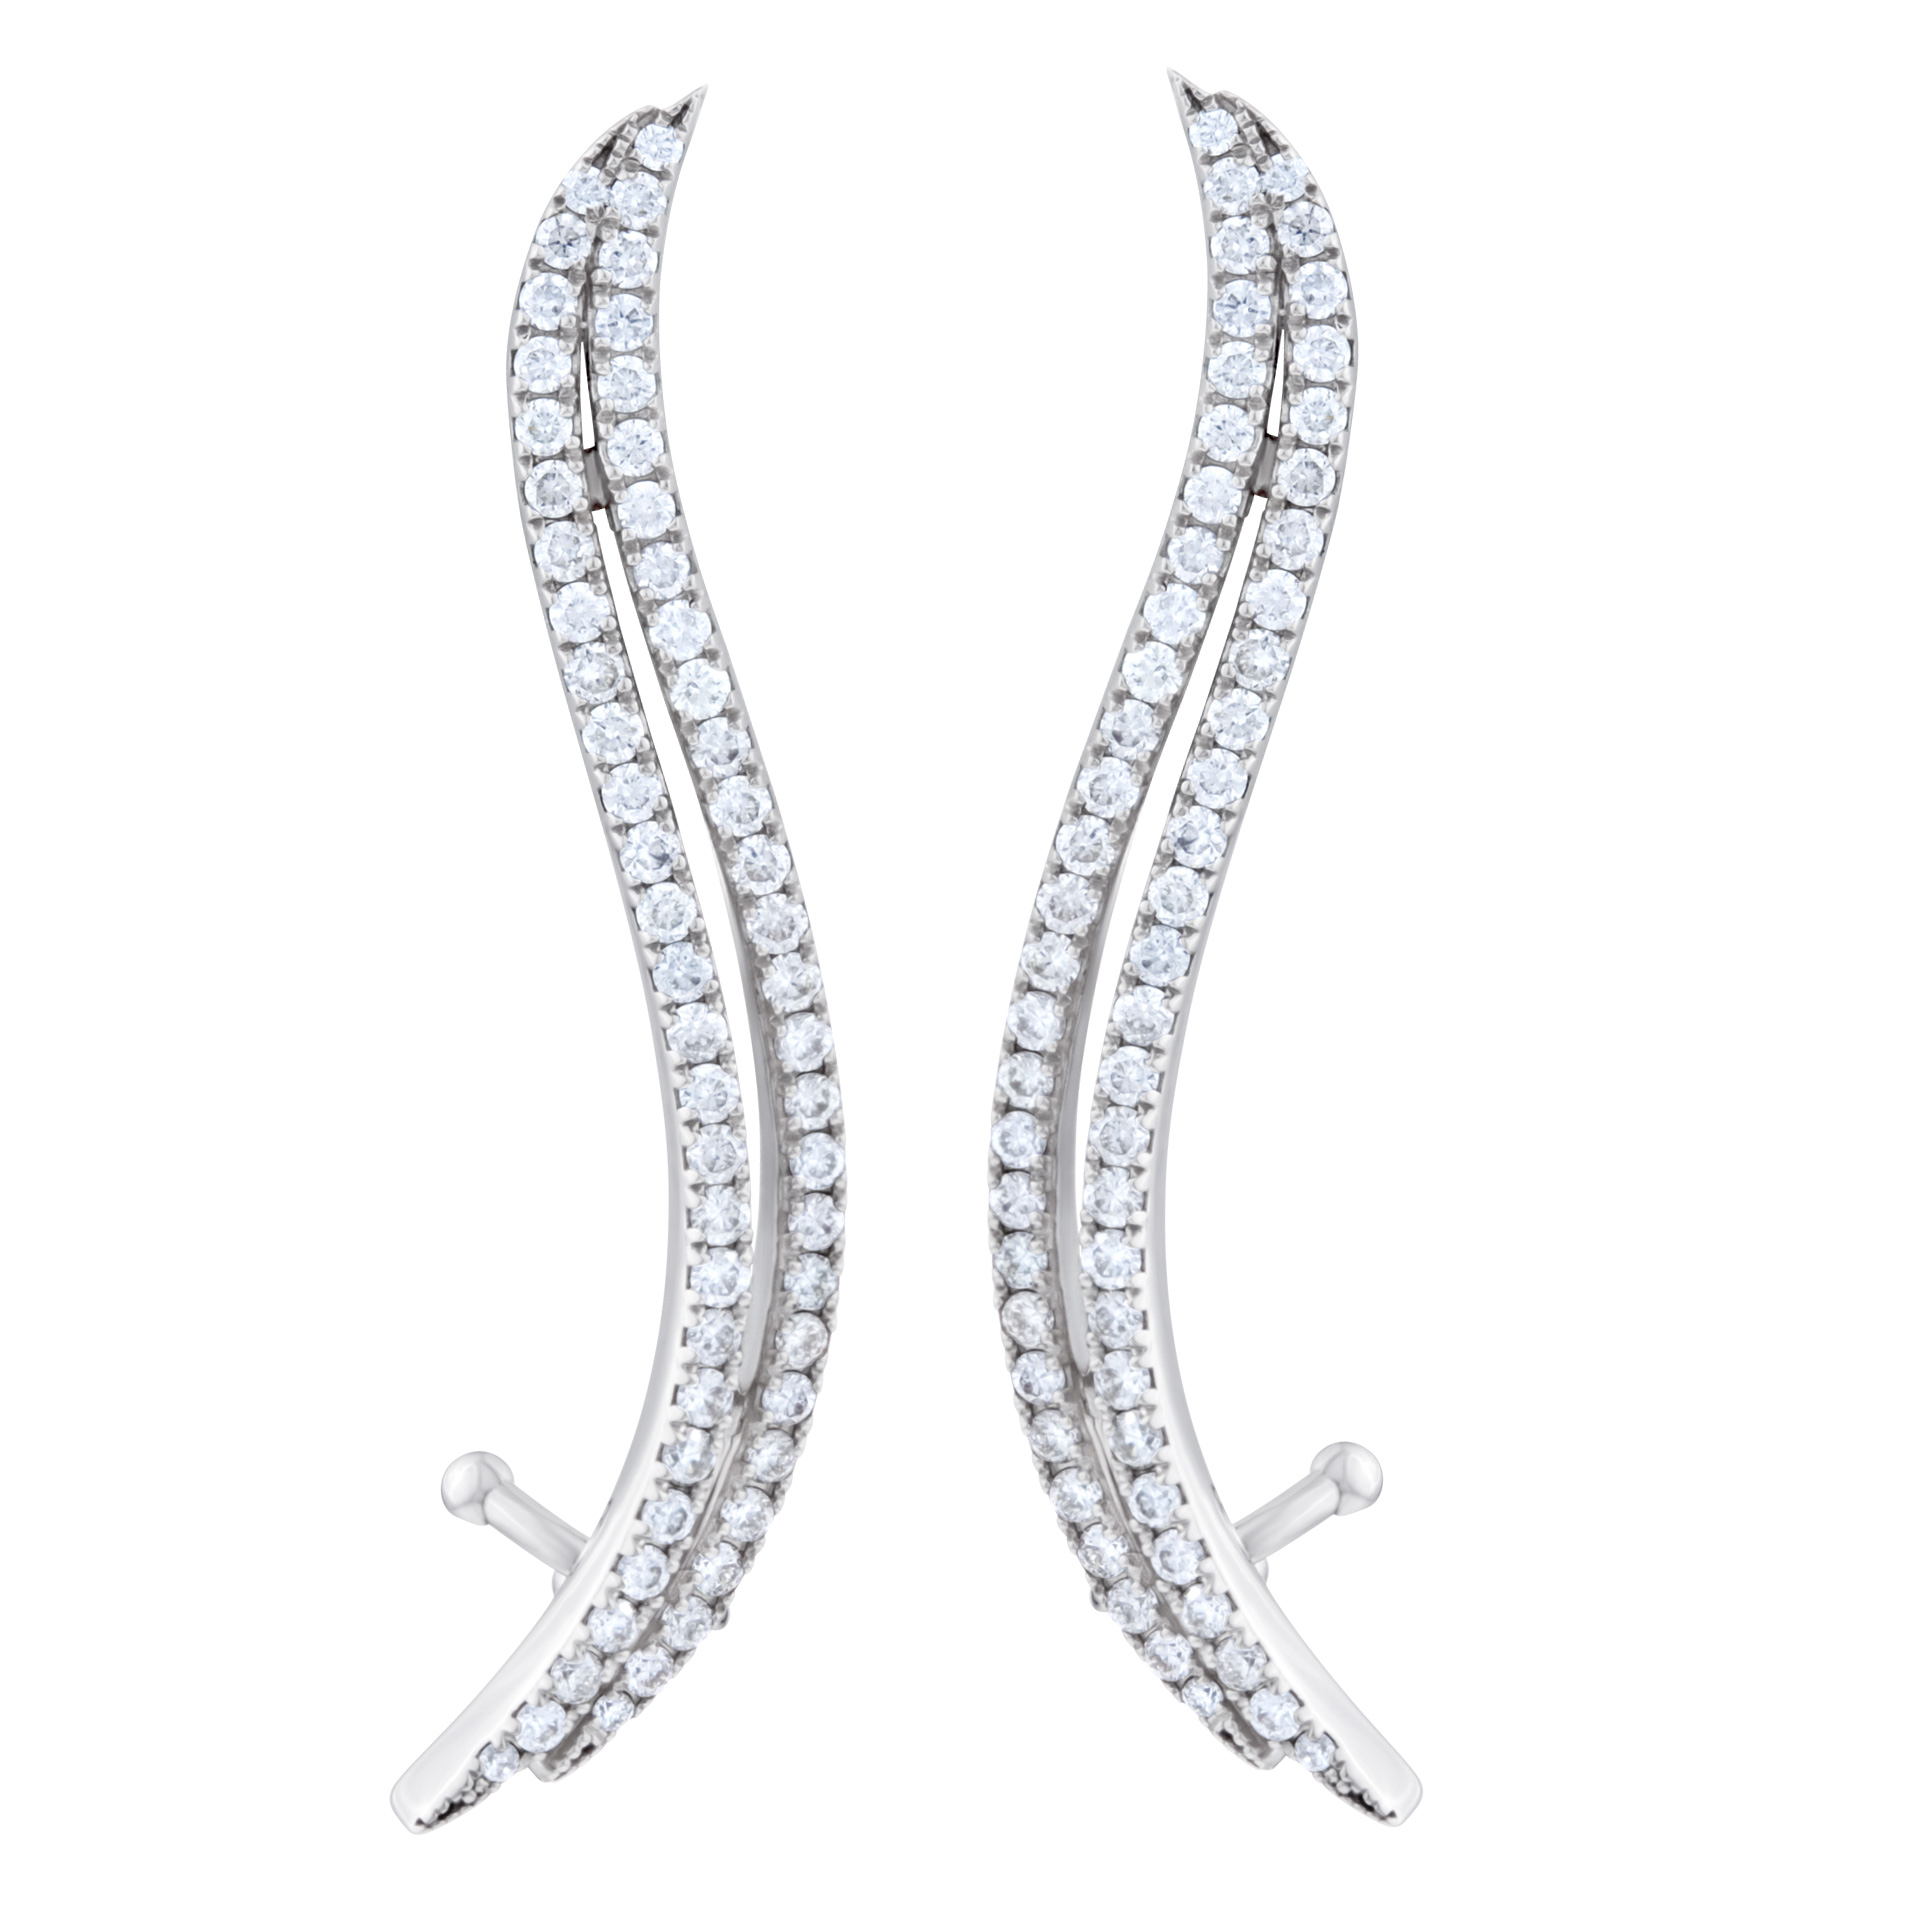 18k white gold diamong earrings with 0.82 carats in diamonds